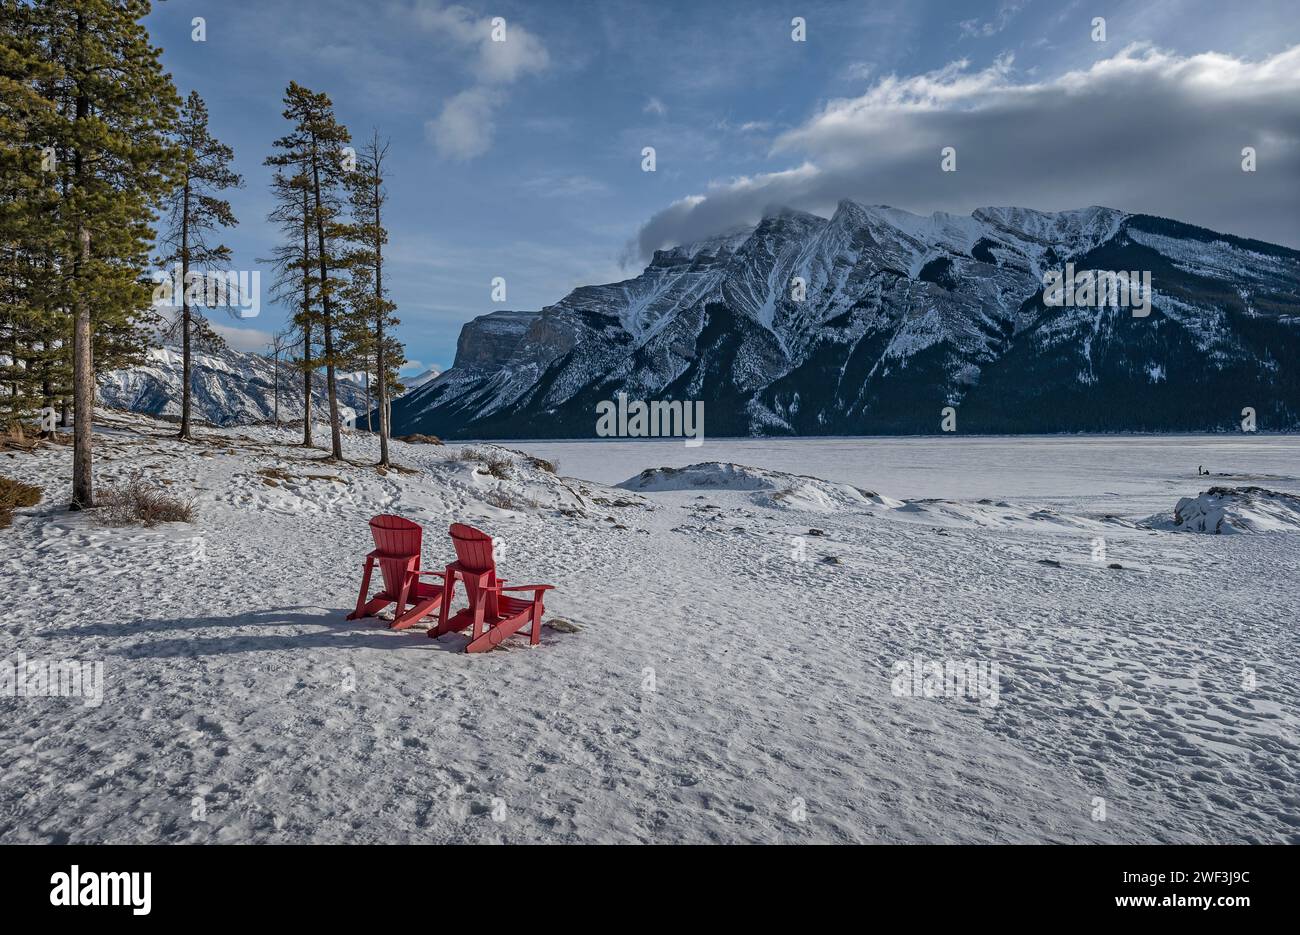 Winter view of red chairs at frozen Lake Minnewanka in Banff National Park, Alberta, Canada Stock Photo